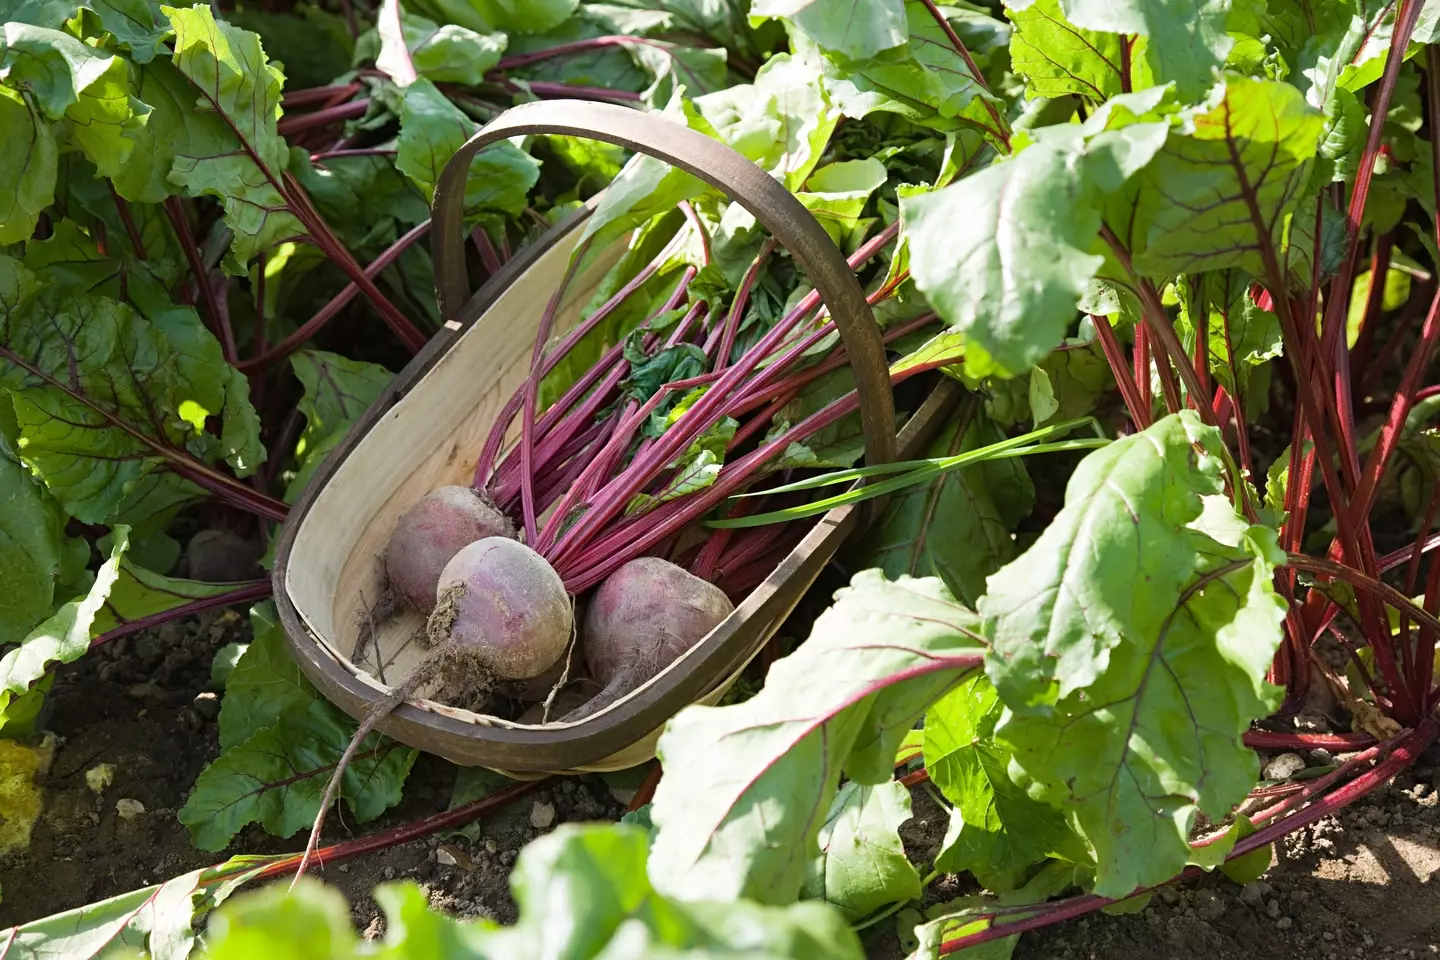 Beetroots is really good for you.